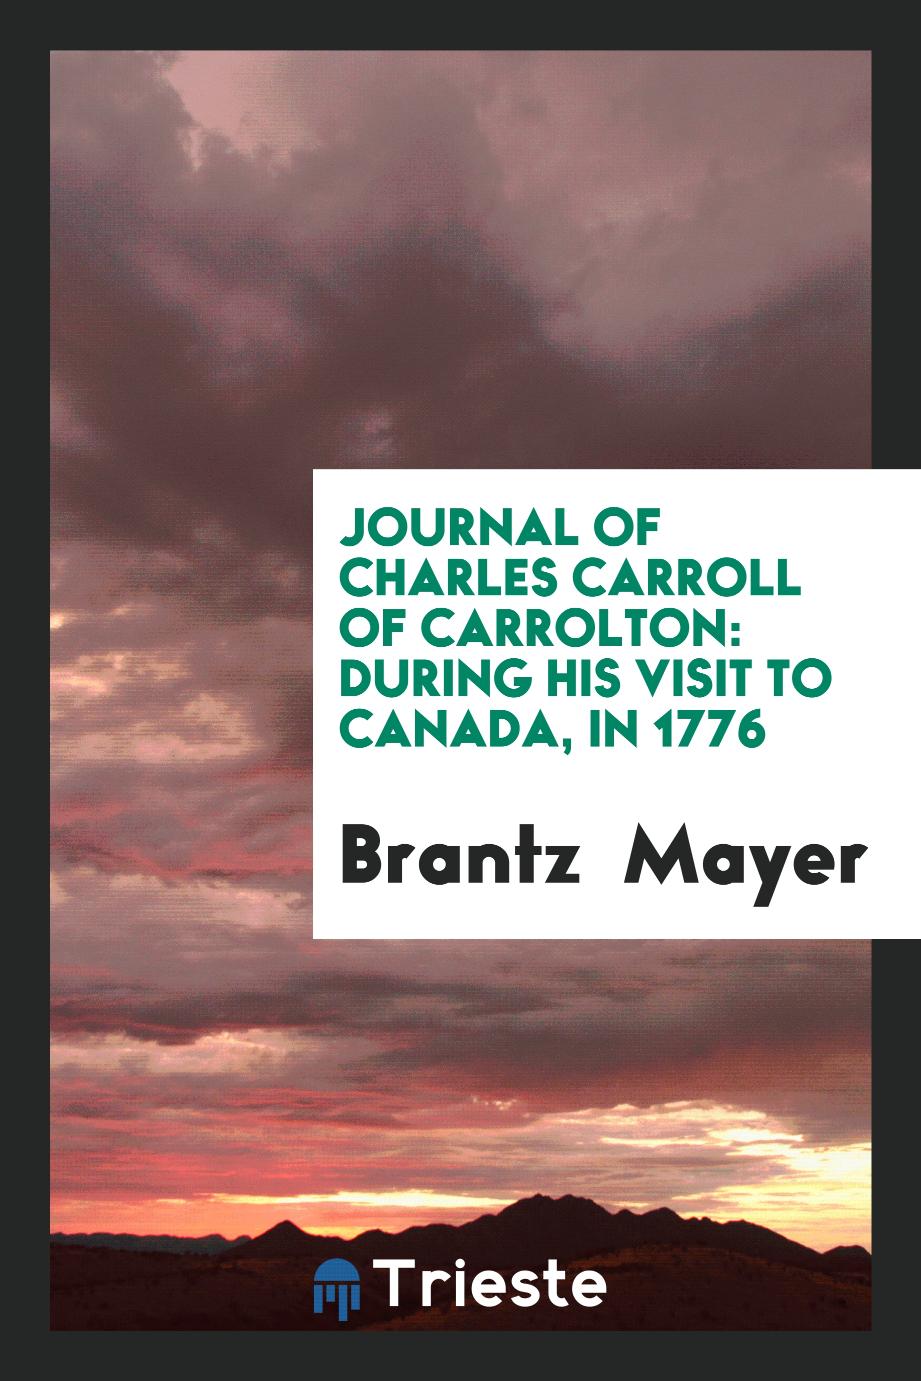 Journal of Charles Carroll of Carrolton: During His Visit to Canada, in 1776